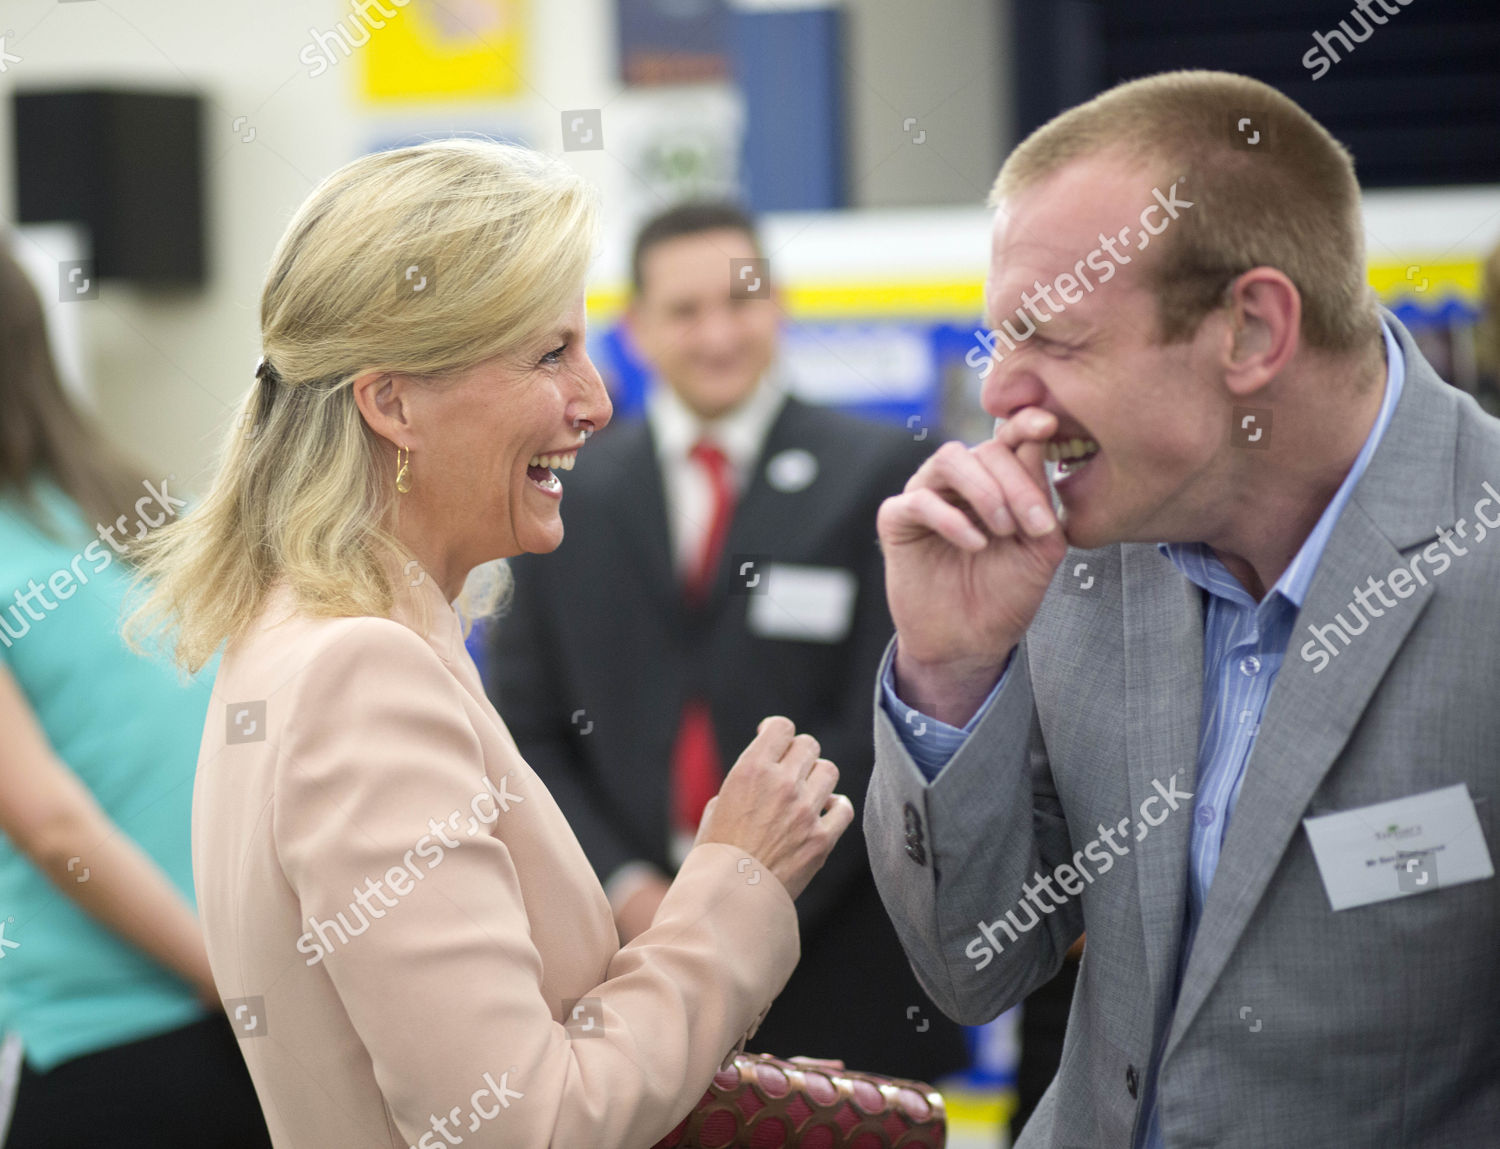 sophie-countess-of-wessex-visits-treloars-college-hampshire-britain-shutterstock-editorial-3787952f.jpg